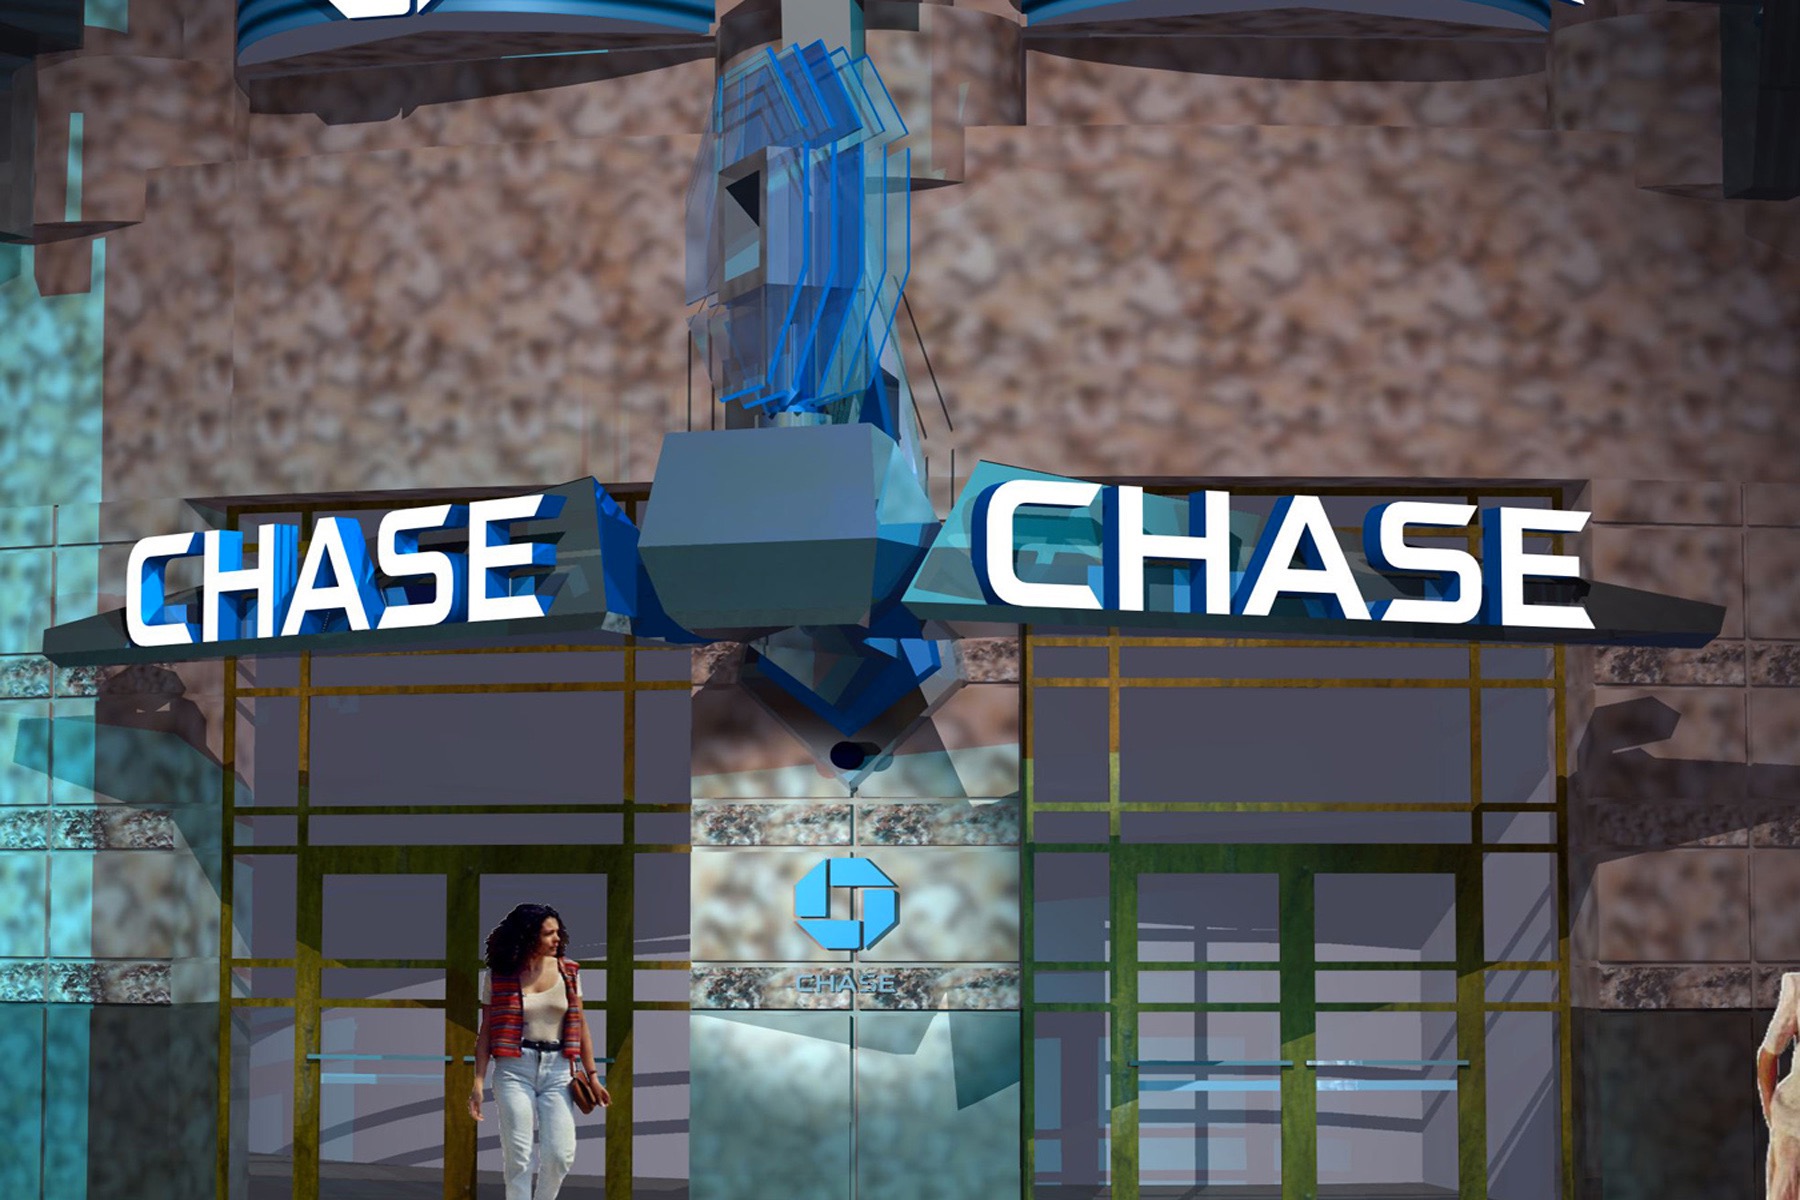 Chase Bank Flagship Signage in Times Square